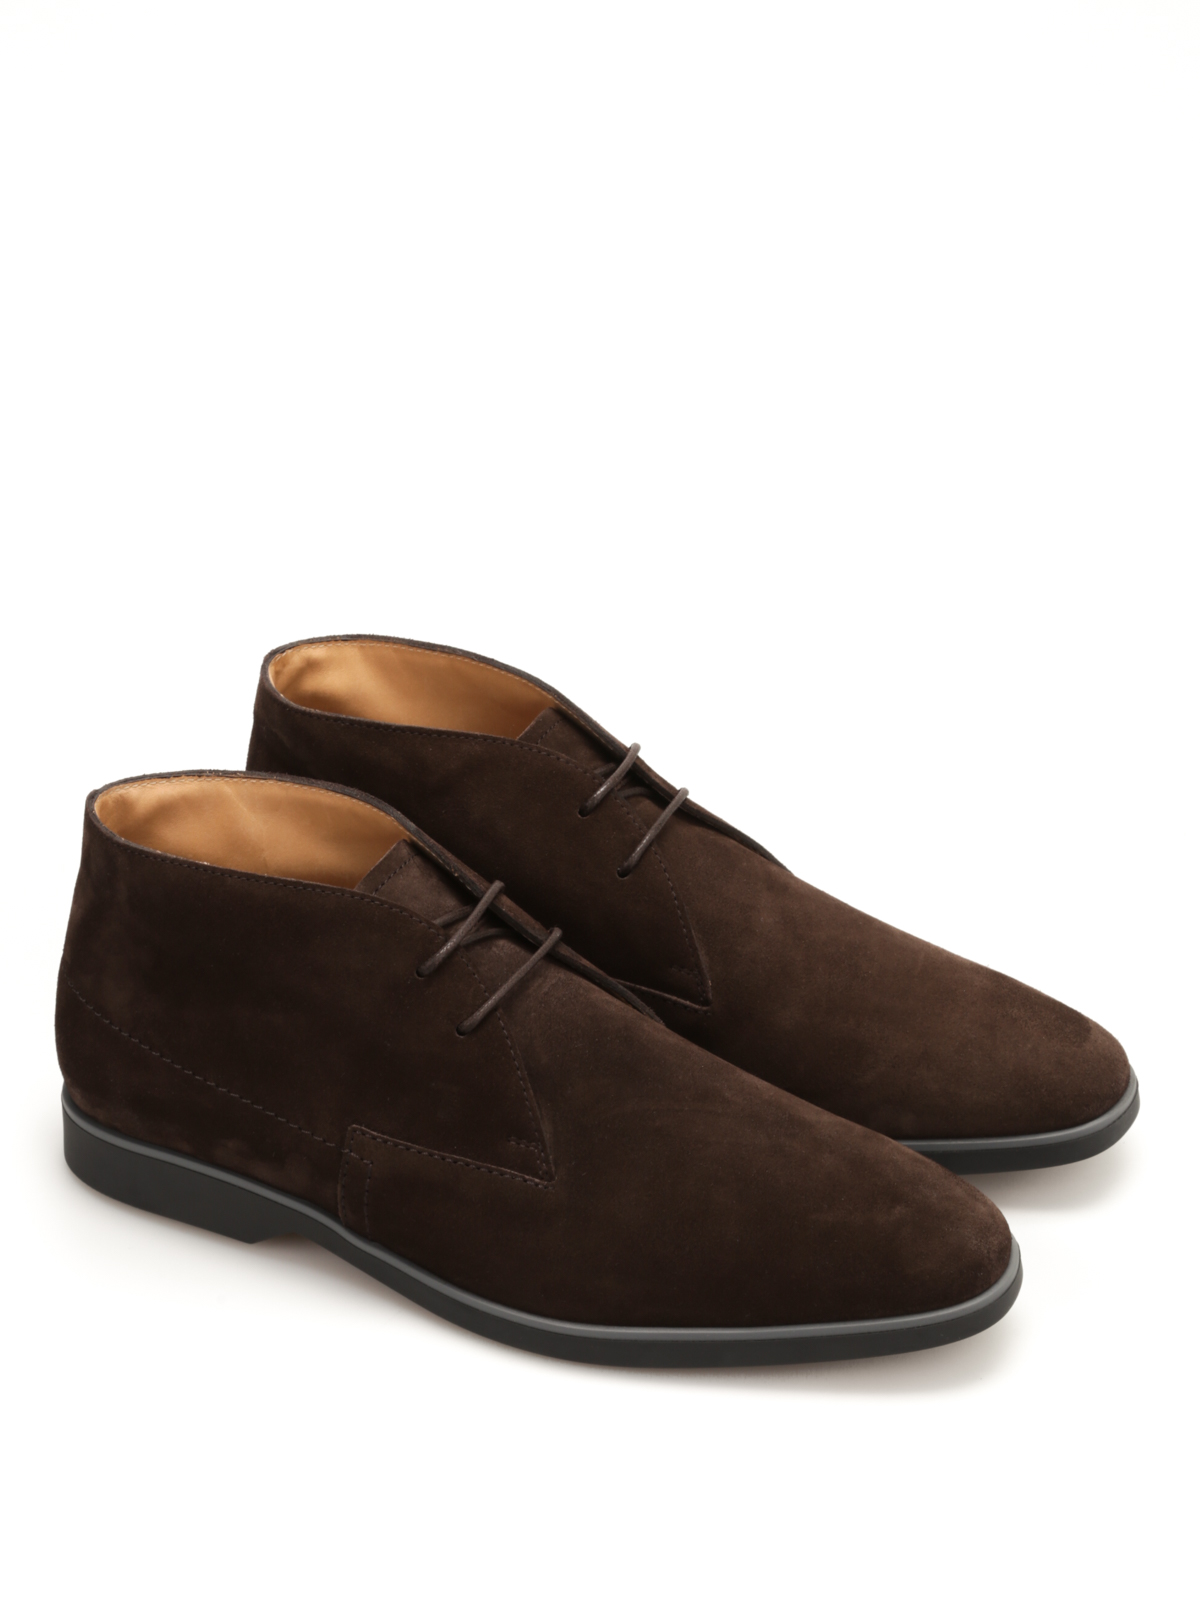 tod's desert boots in suede